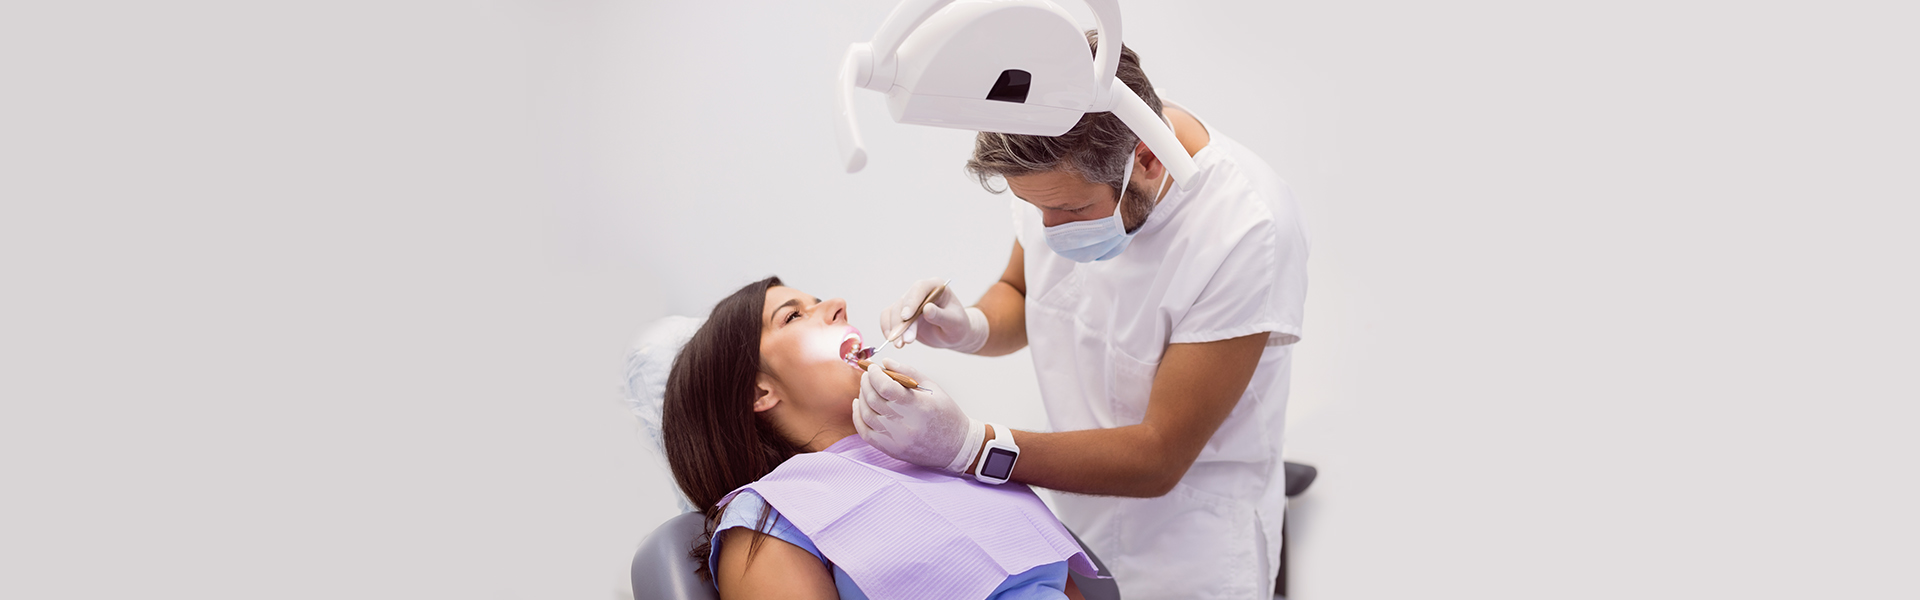 Can I Get My Teeth Cleaned Without a Dental Exam?